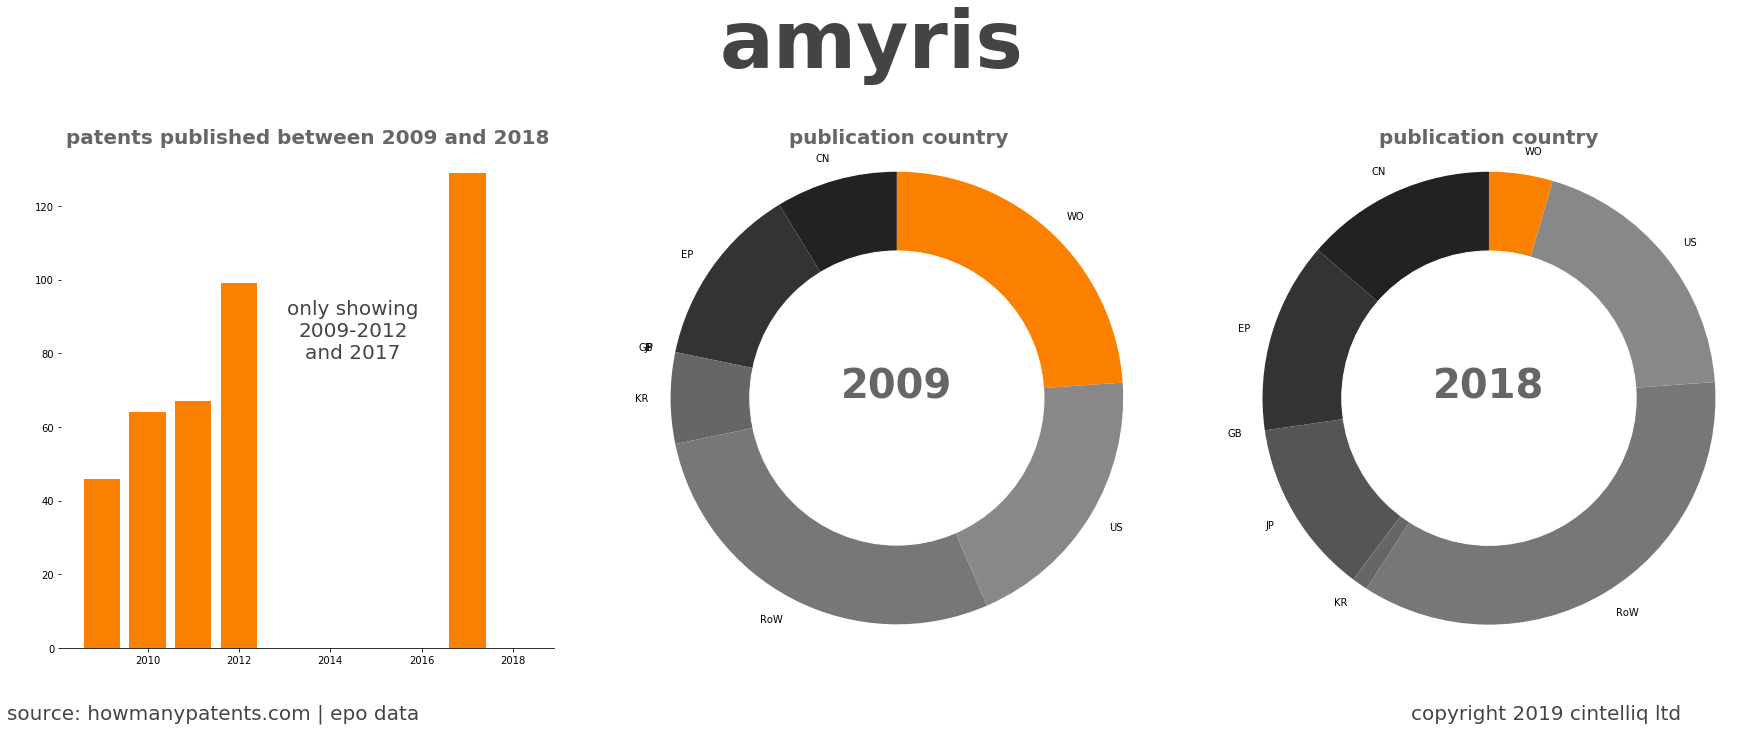 summary of patents for Amyris